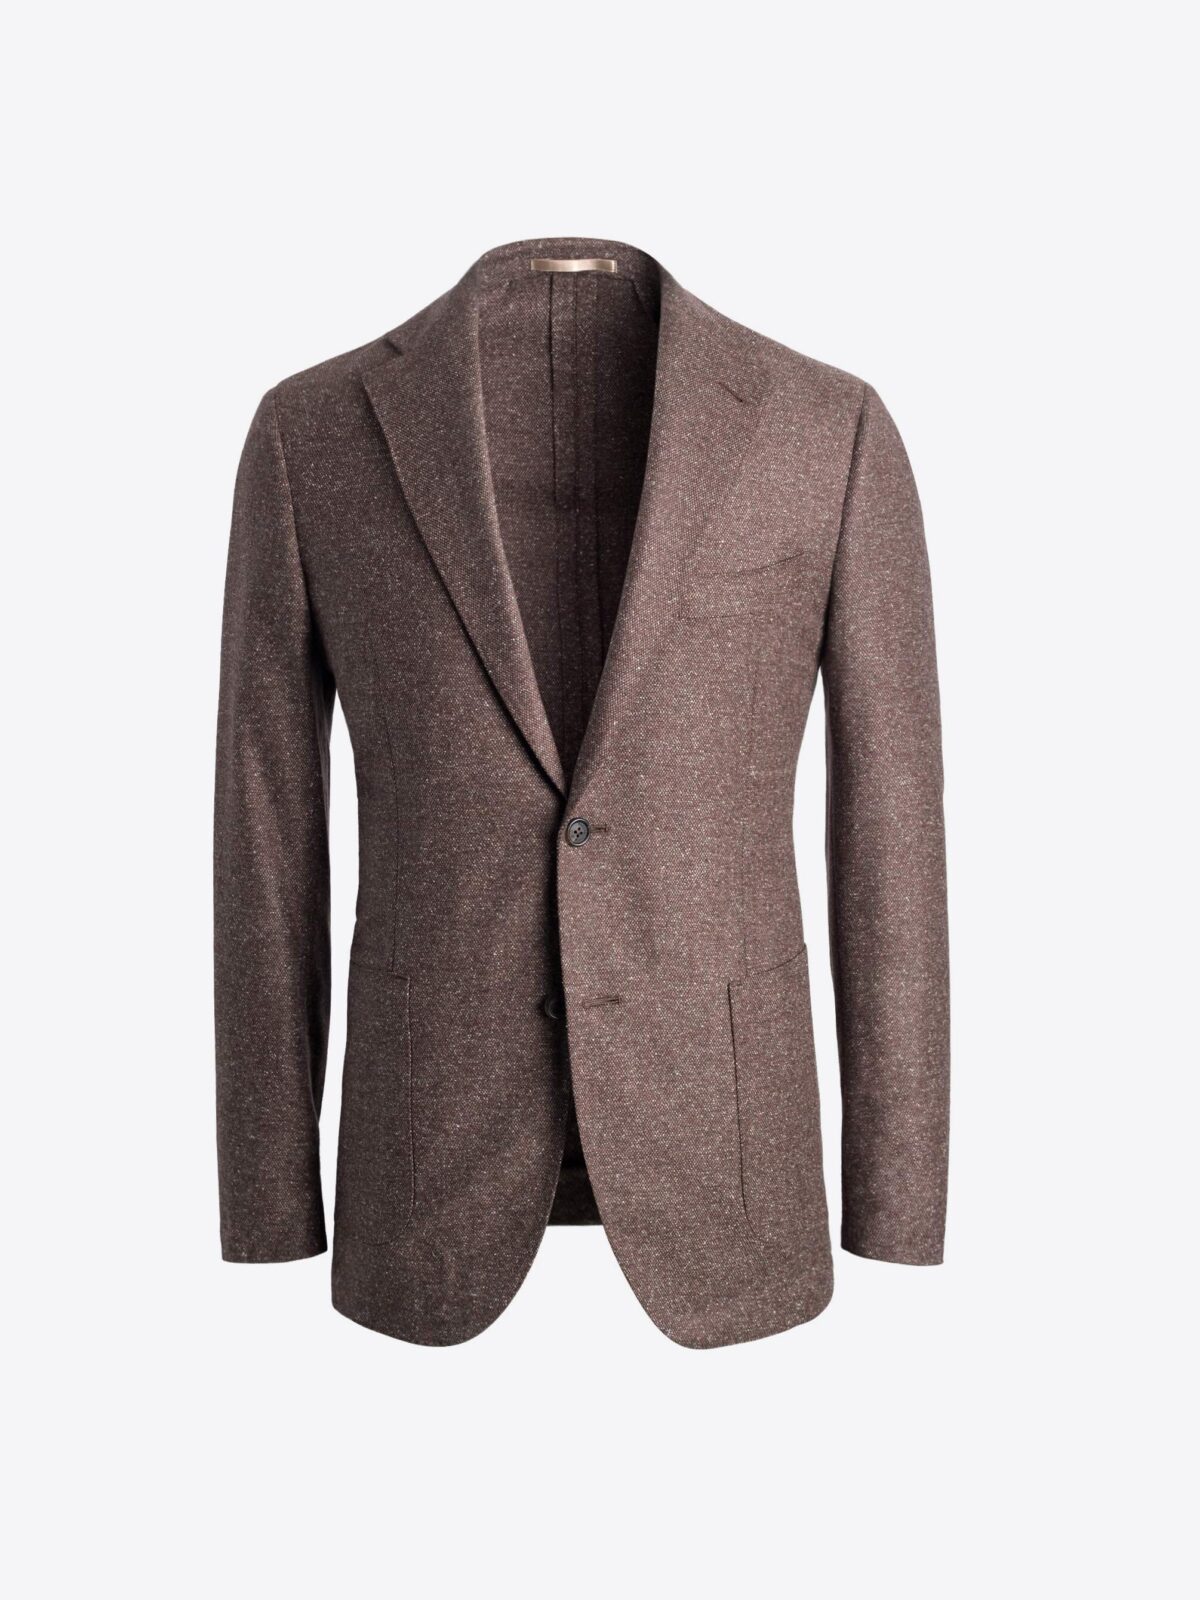 Bedford Bordeaux Wool and Silk Donegal Hopsack Jacket - Custom Fit